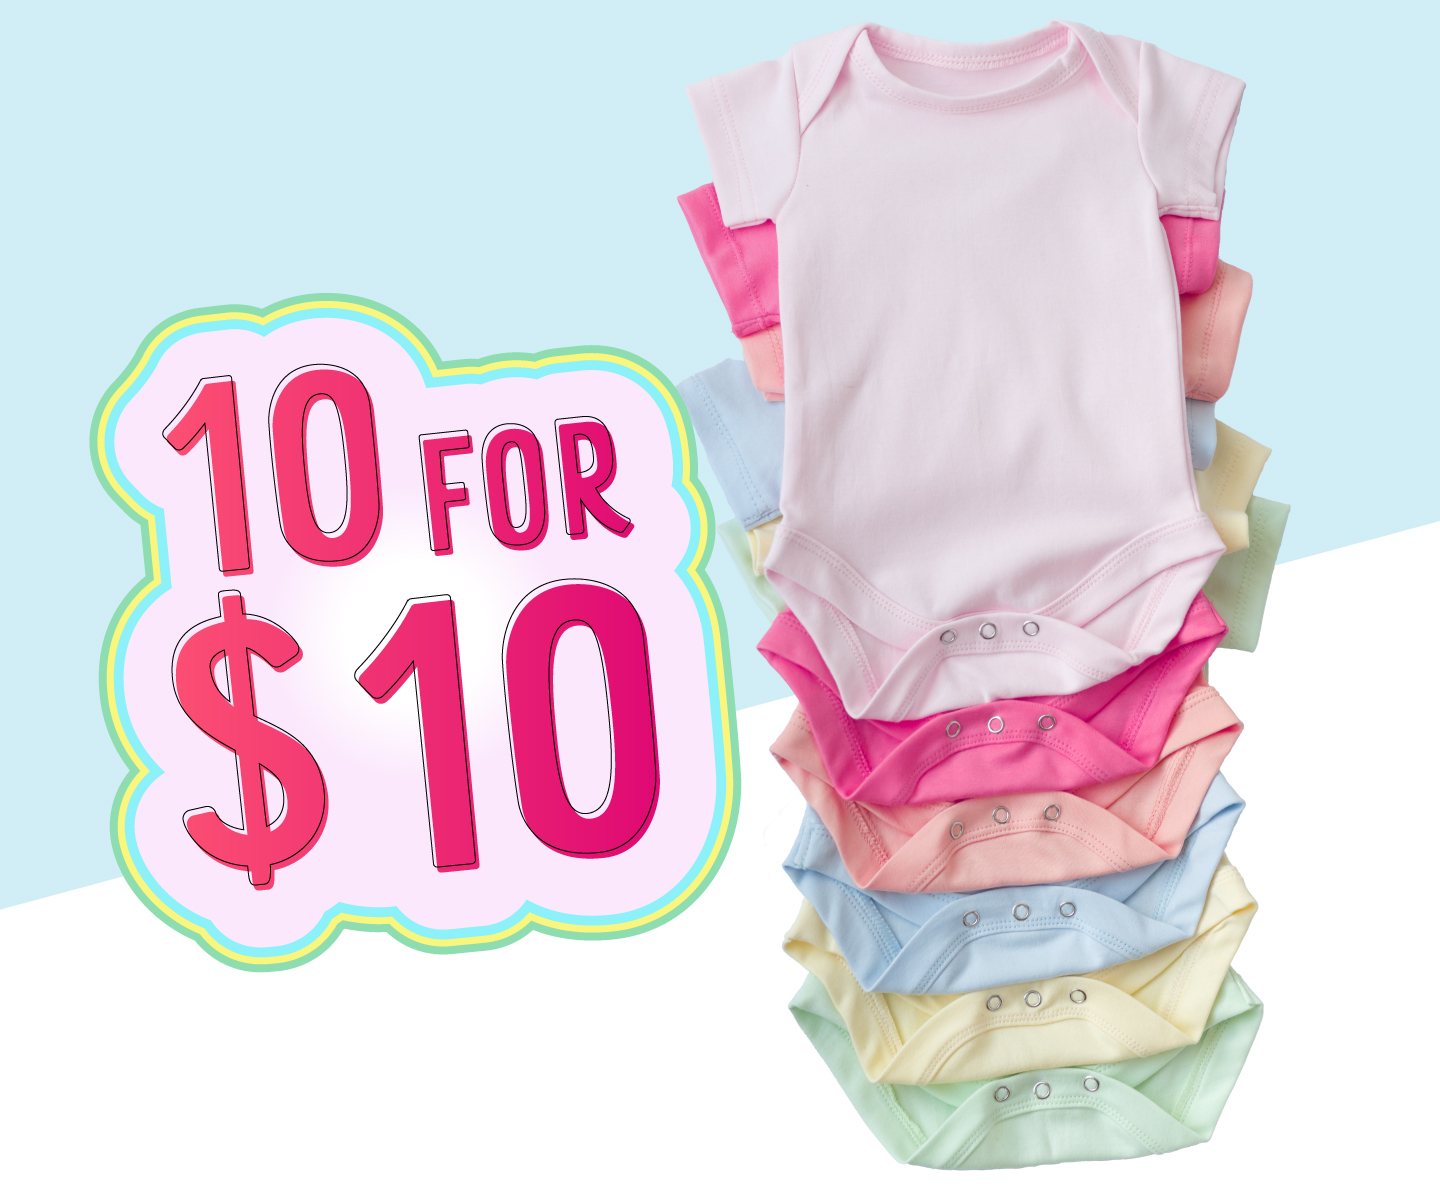 Bodysuits are always 10 for $10, everyday!